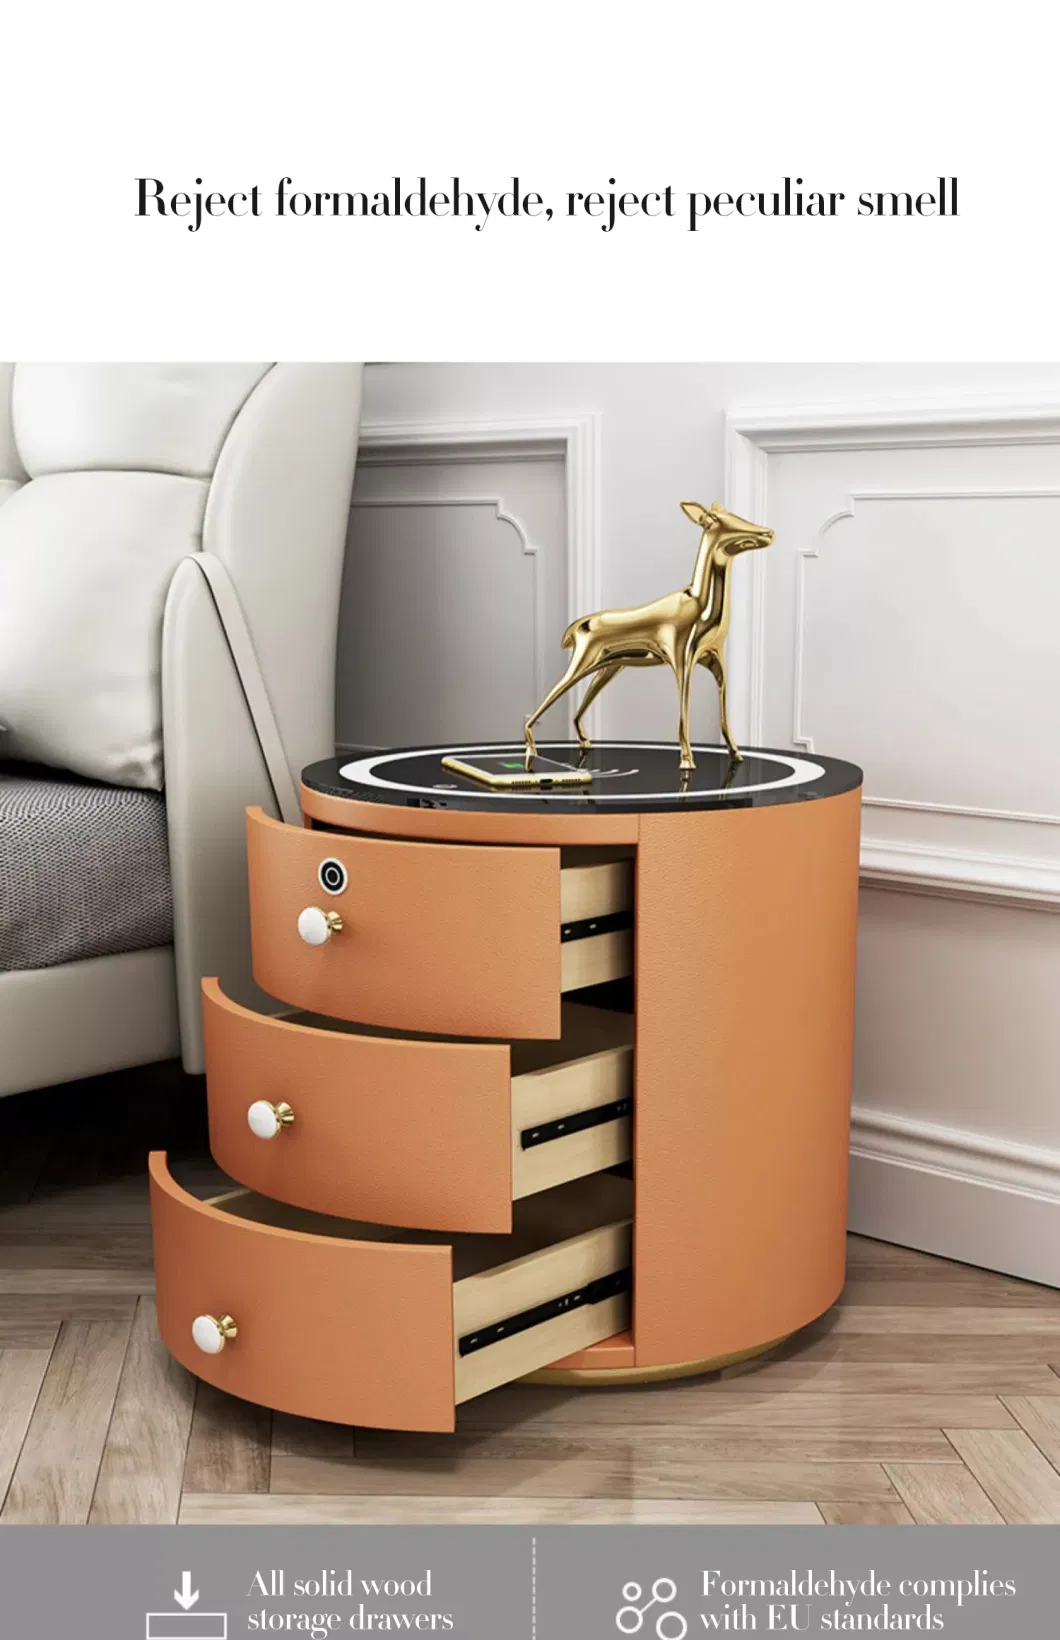 New Round Design Smart Bedroom Nightstands Touch LED Lights Modern Smart Leather Finish Bedside Table